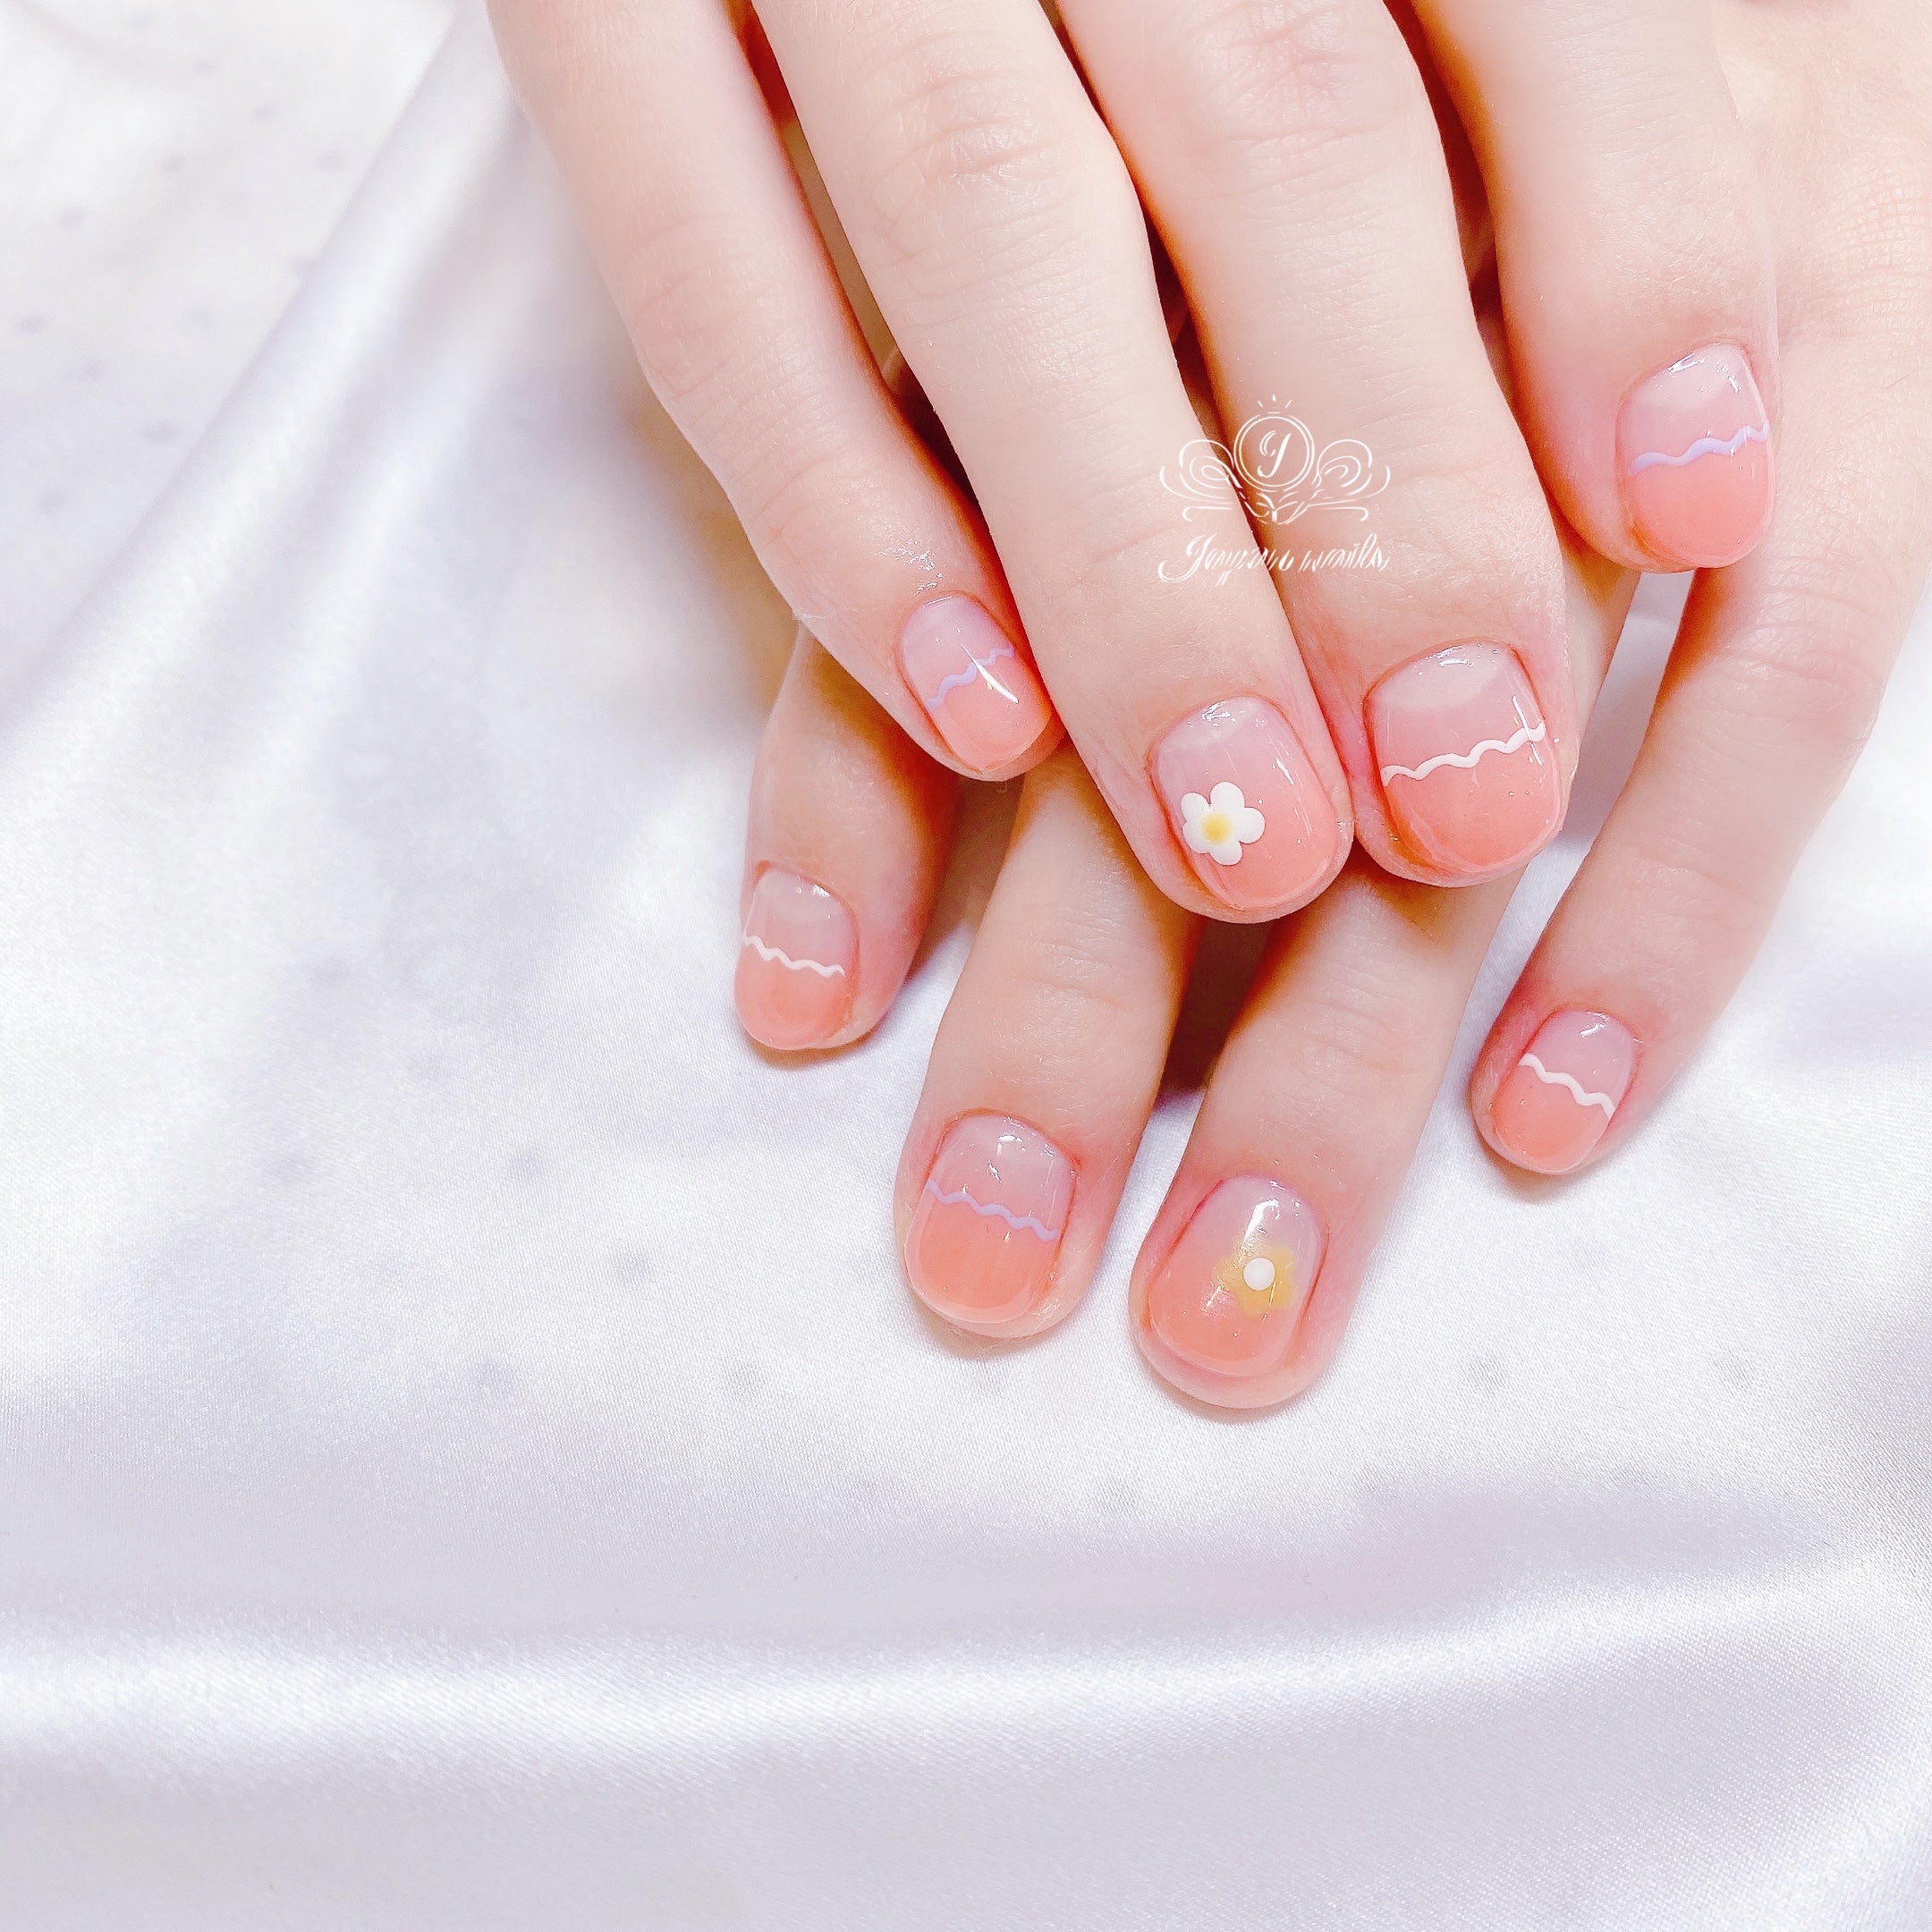 12 International Nail Trends You Need to Know About | Who What Wear